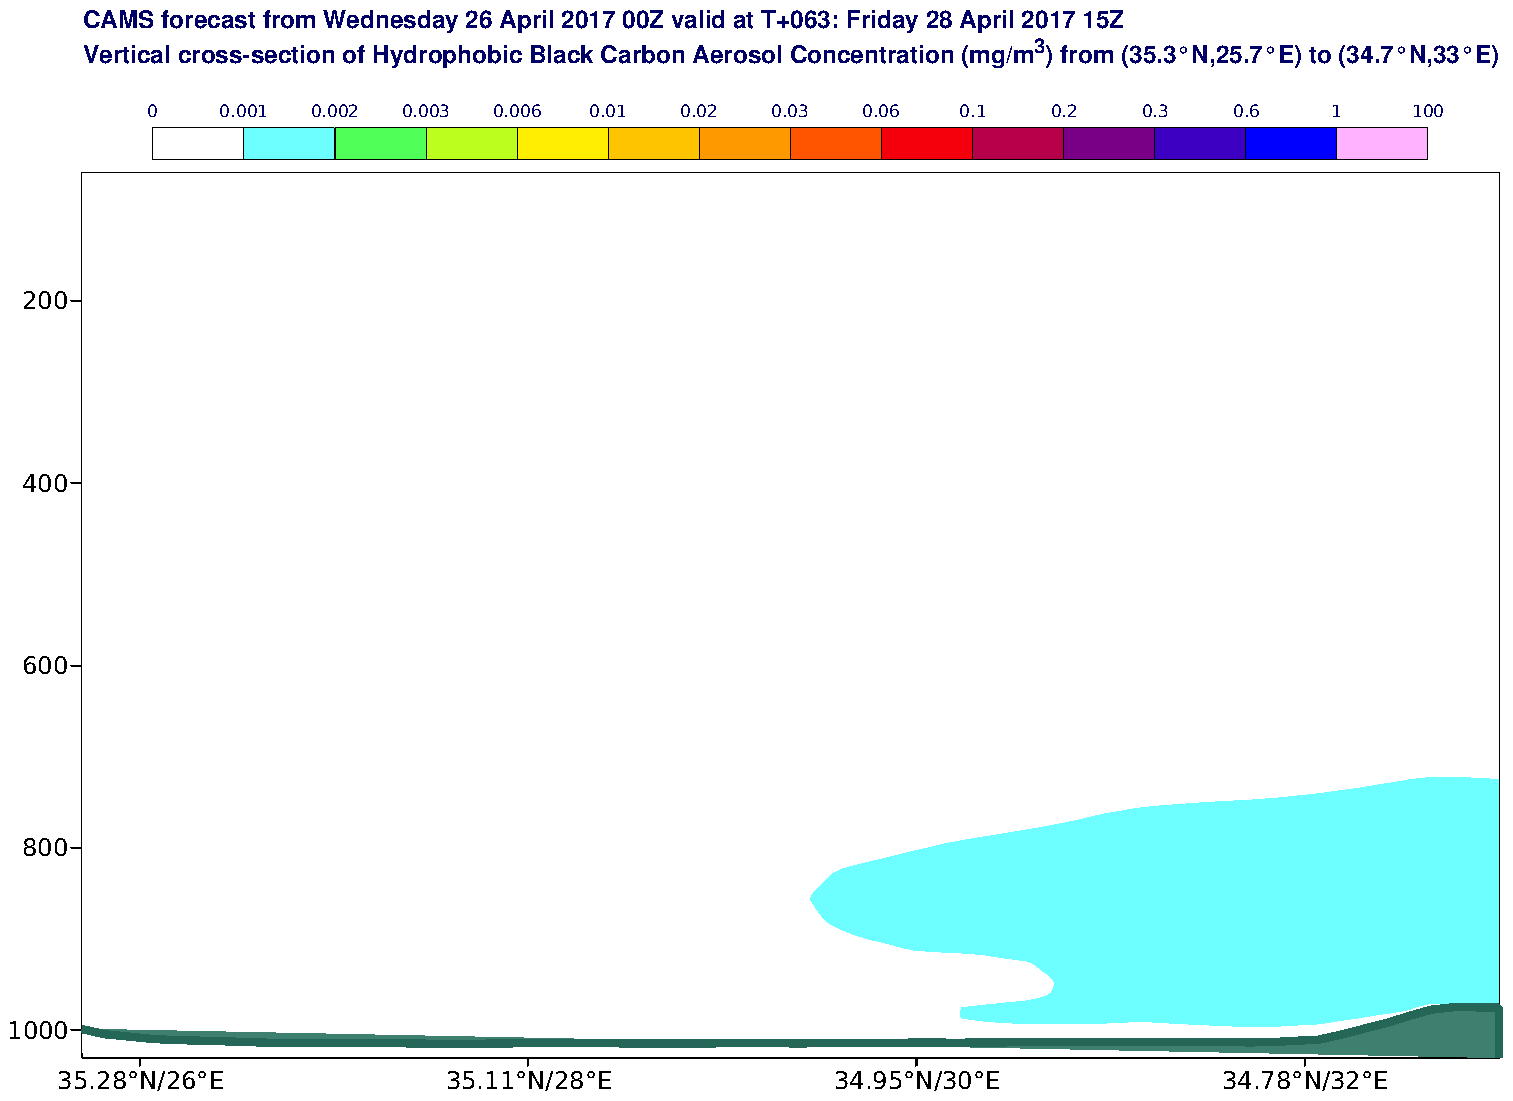 Vertical cross-section of Hydrophobic Black Carbon Aerosol Concentration (mg/m3) valid at T63 - 2017-04-28 15:00